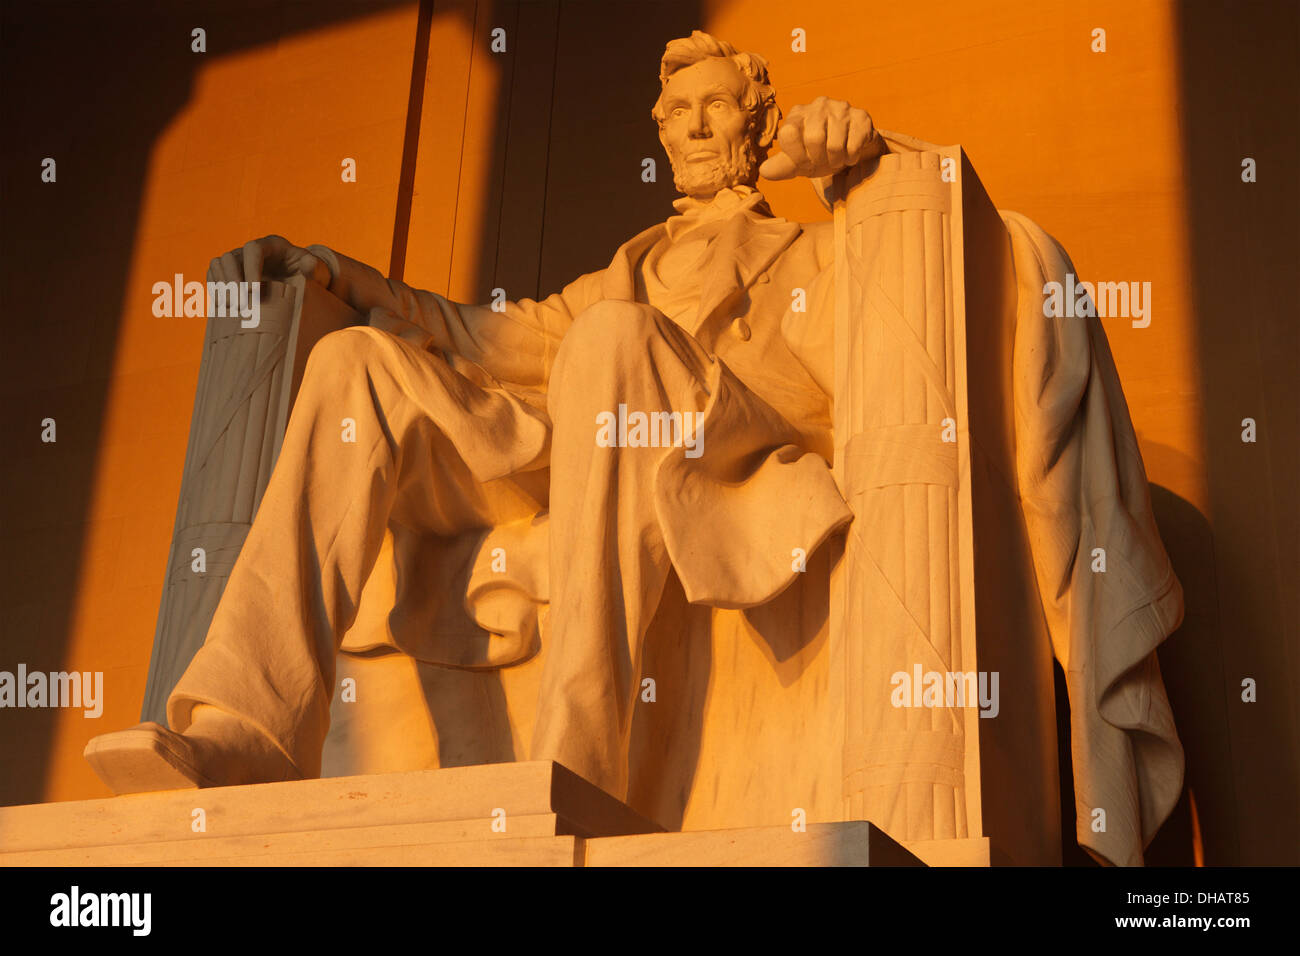 Statue of Abraham Lincoln at the Lincoln memorial, Washington D.C., USA Stock Photo